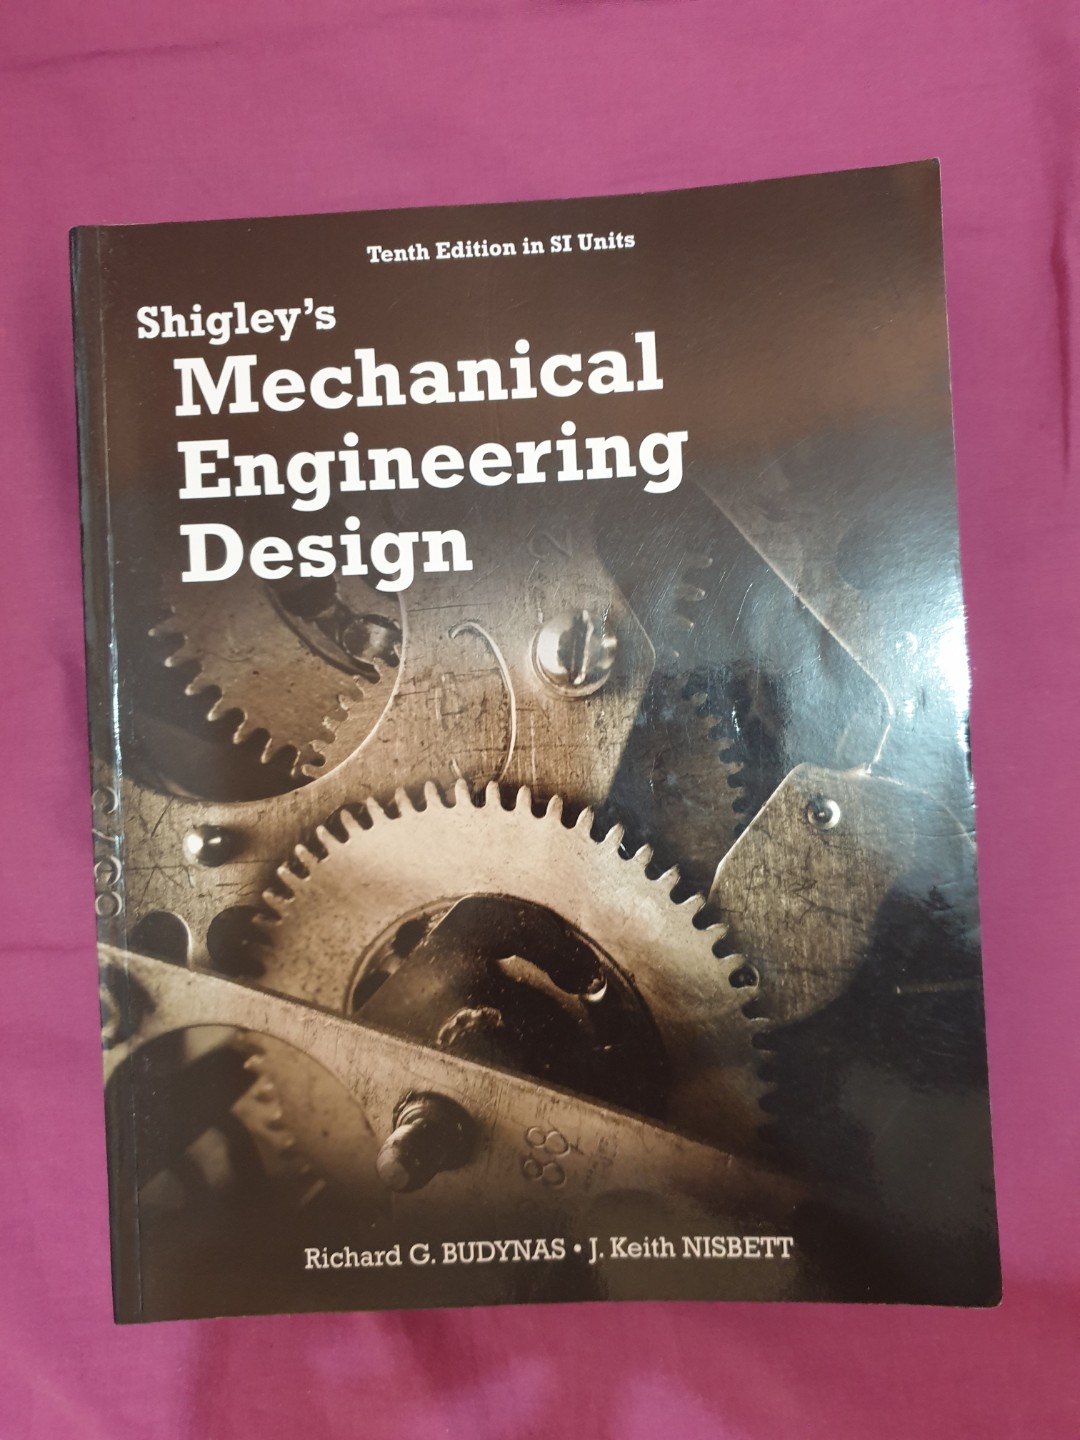 Shigley's Mechanical Engineering Design Edition, Hobbies & Toys, & Magazines, Textbooks on Carousell